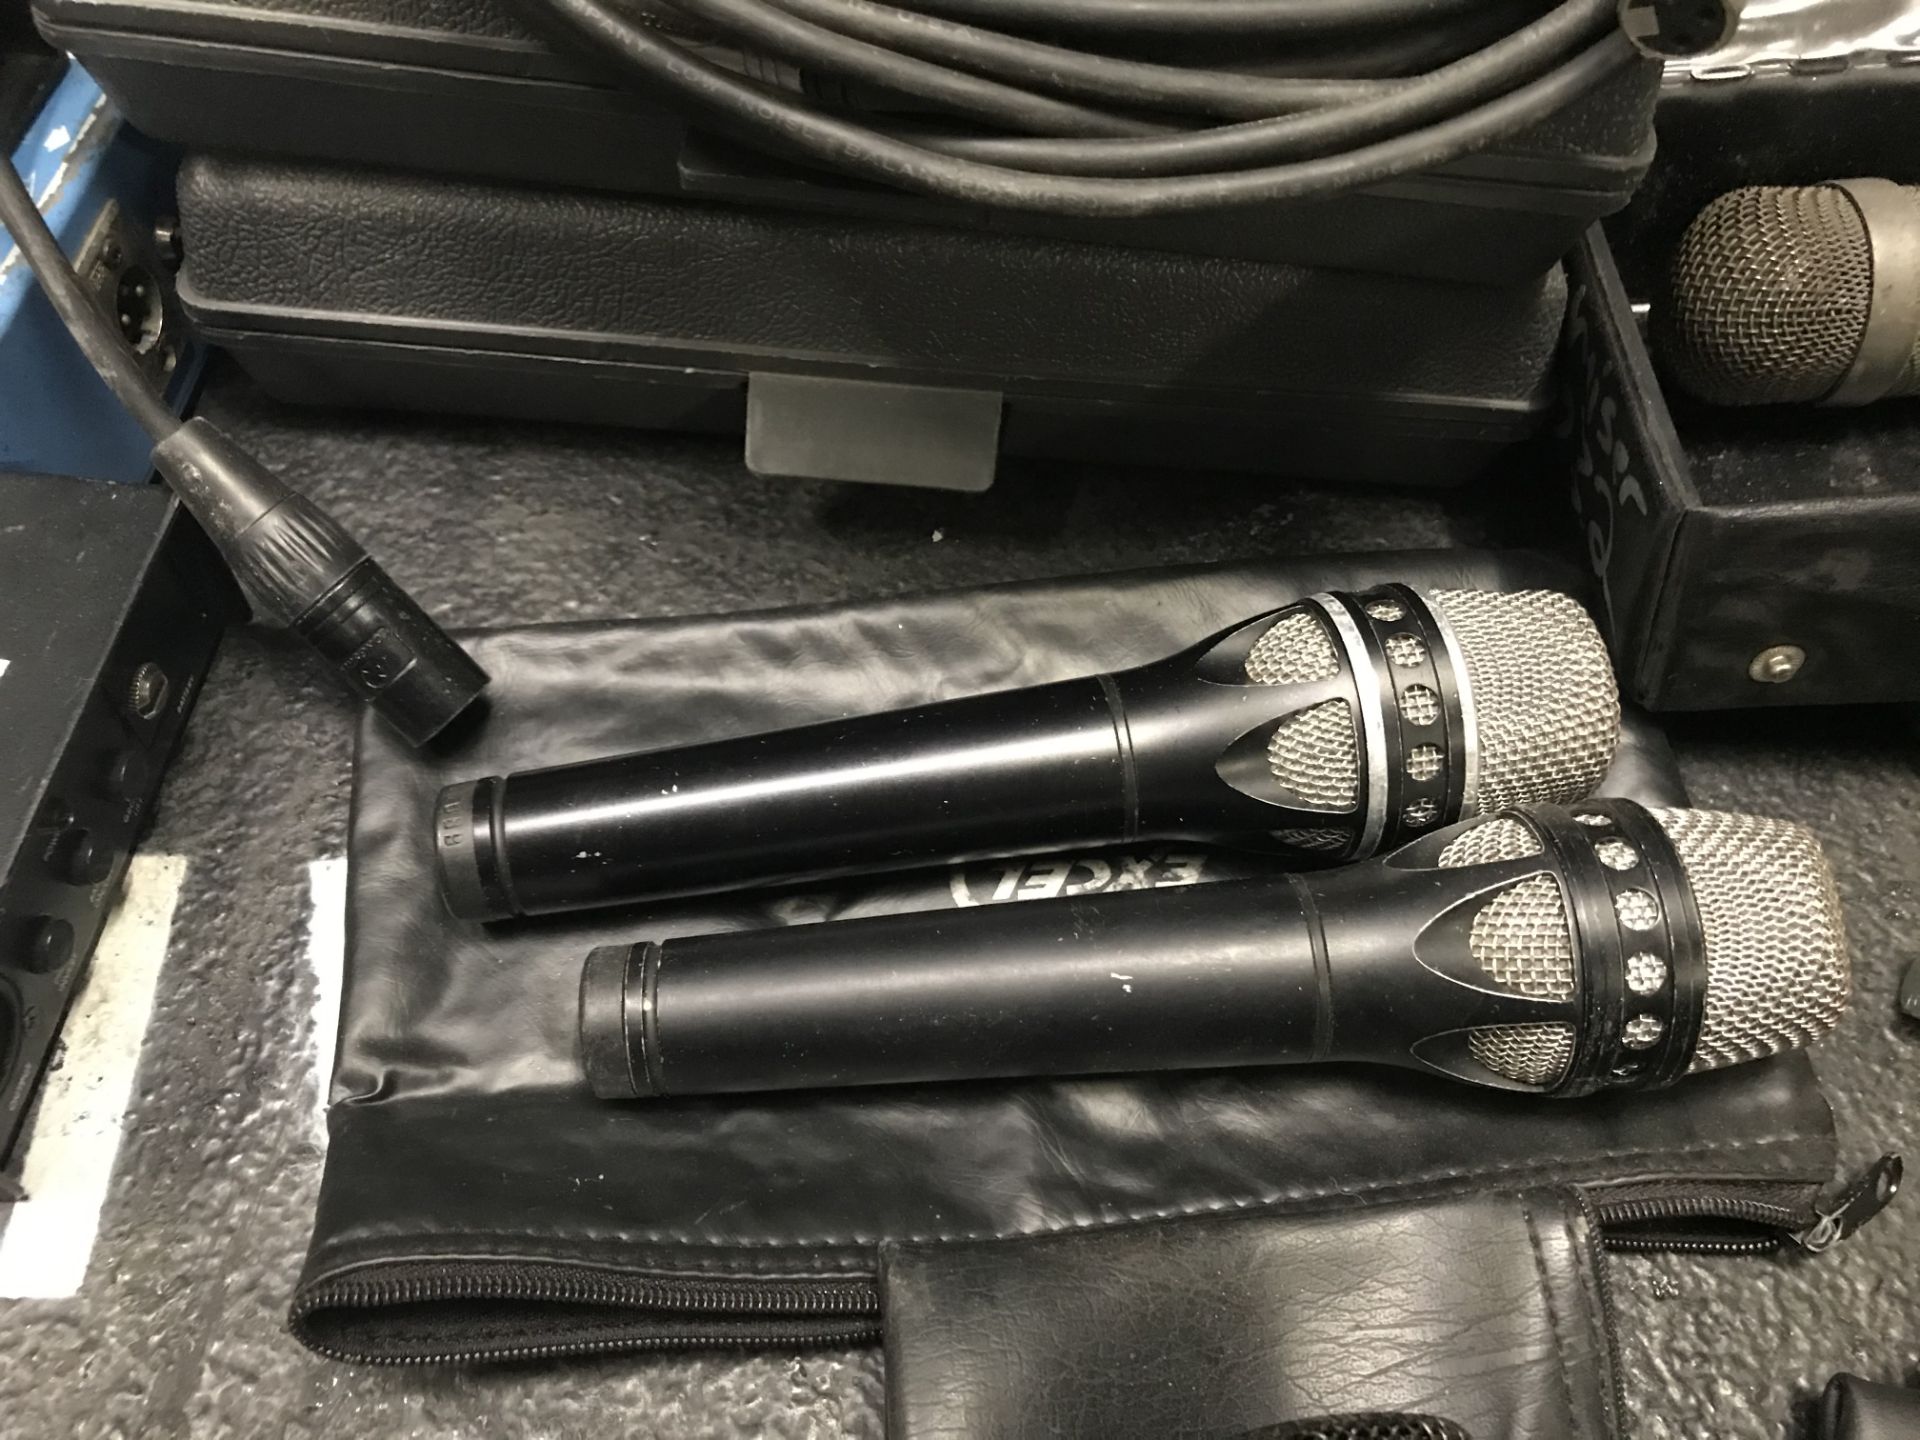 LOT OF: (14) VARIOUS MICROPHONES, CABLES, BOXES, MIC BAGS - Image 6 of 12